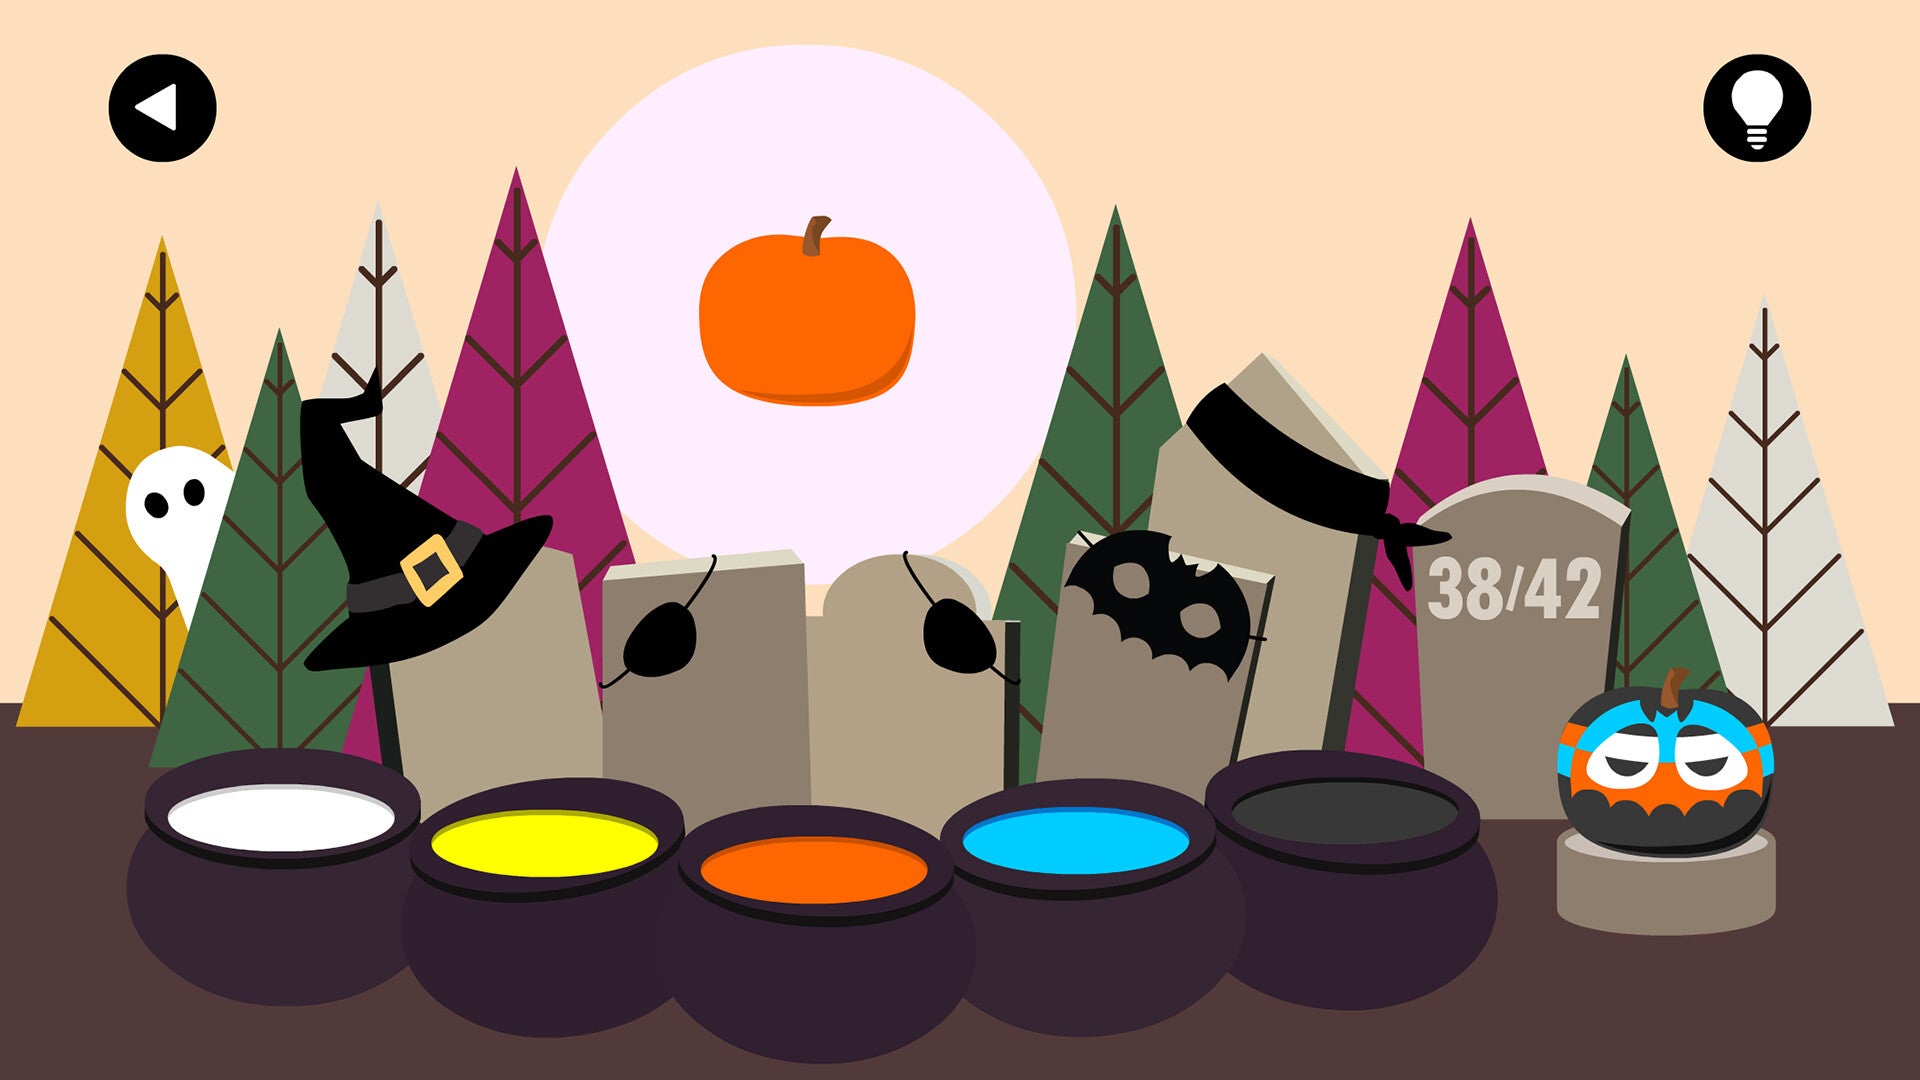 A screen from Boo!: a floating pumpkin above several cauldrons full of different coloured paint, along with different head accessories with which to decorate the pumpkin.